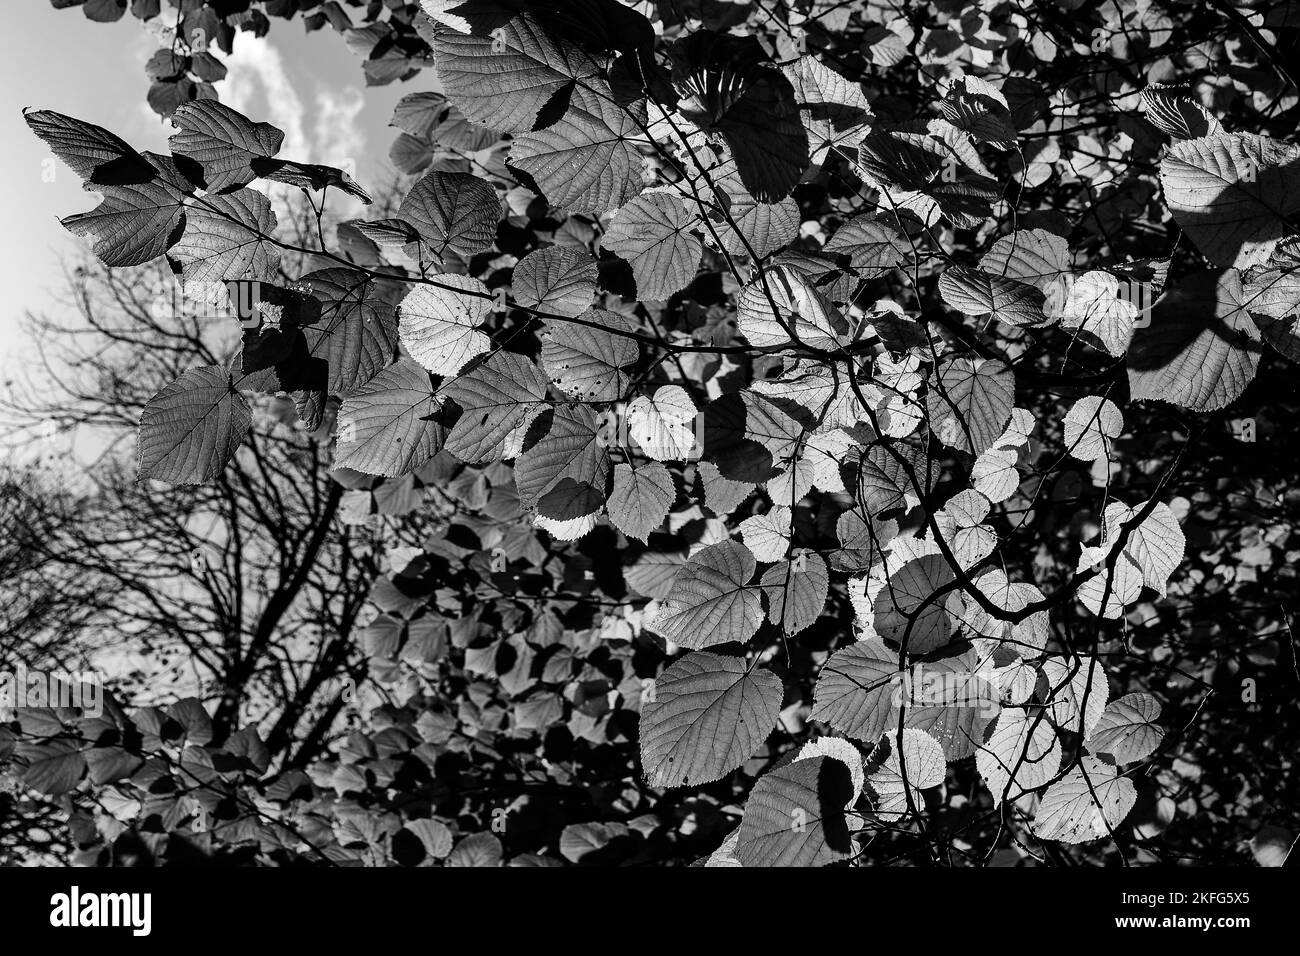 Green leaves lit by autumn sunlight against a blue sky. Black and white photograph. Stock Photo